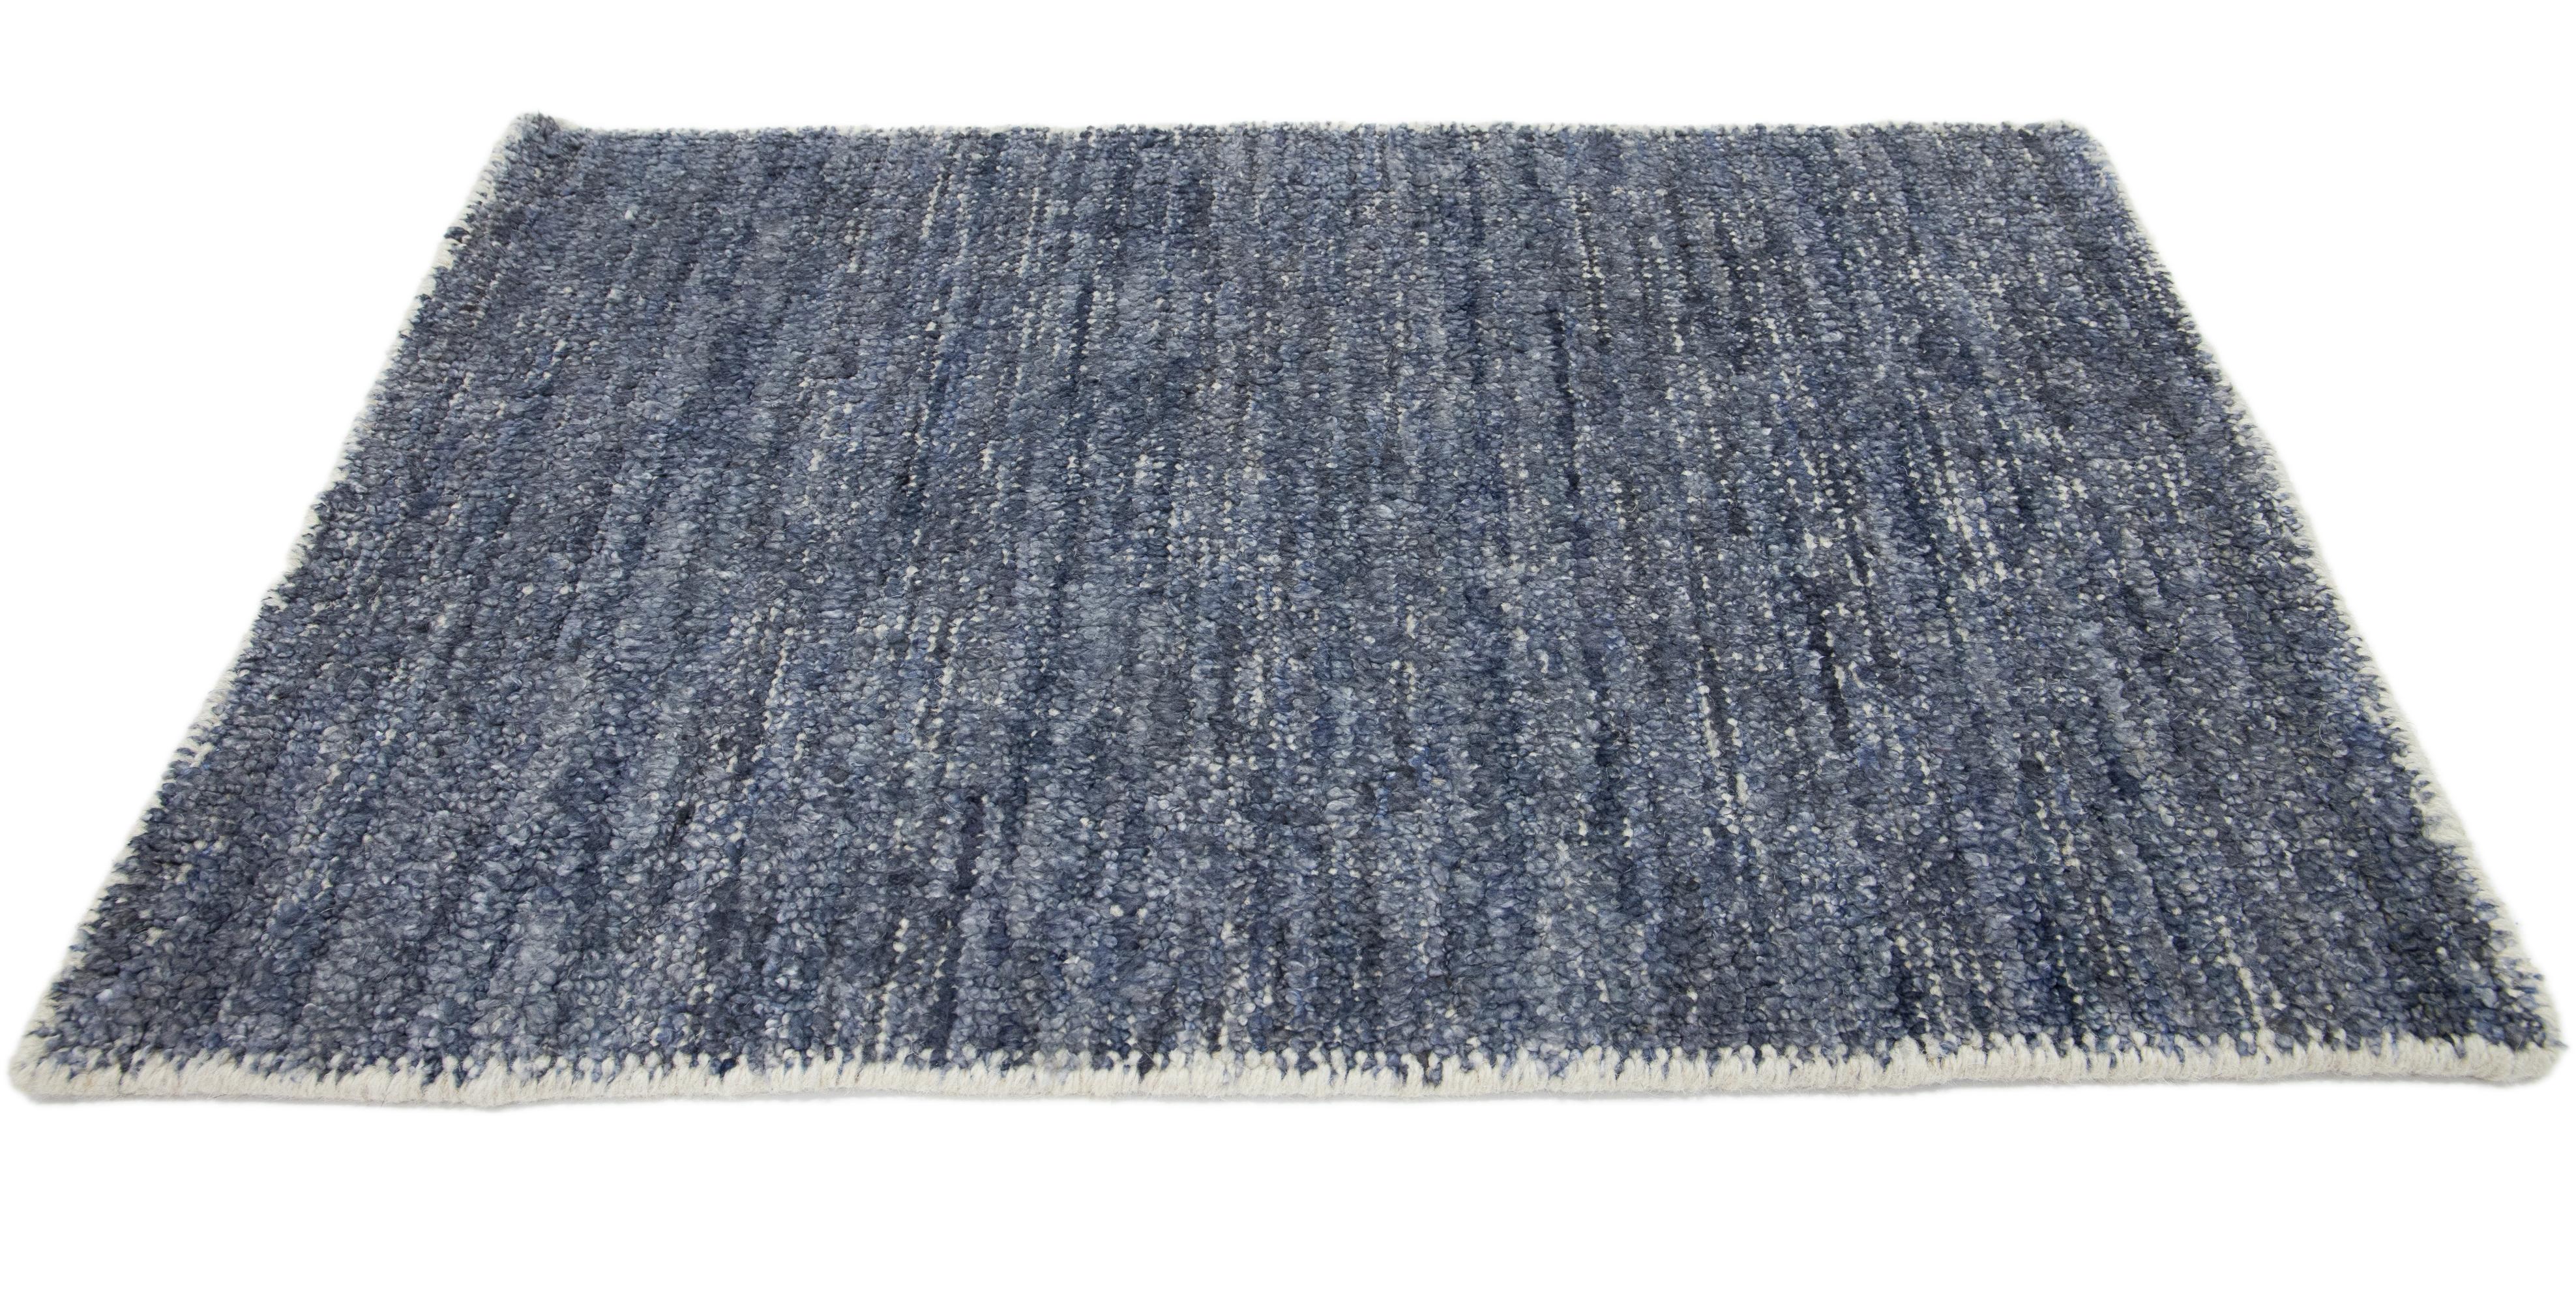 Apadana's Modern Solid custom rug. Custom sizes and colors made-to-order. 

Material: 65% Viscose, 15% Wool, and 20% Cotton.
Techniques: Hand-Woven
Style: Solid-Modern
Lead time: Approx. 15-16 wks available 
Colors: As shown, other custom colors are